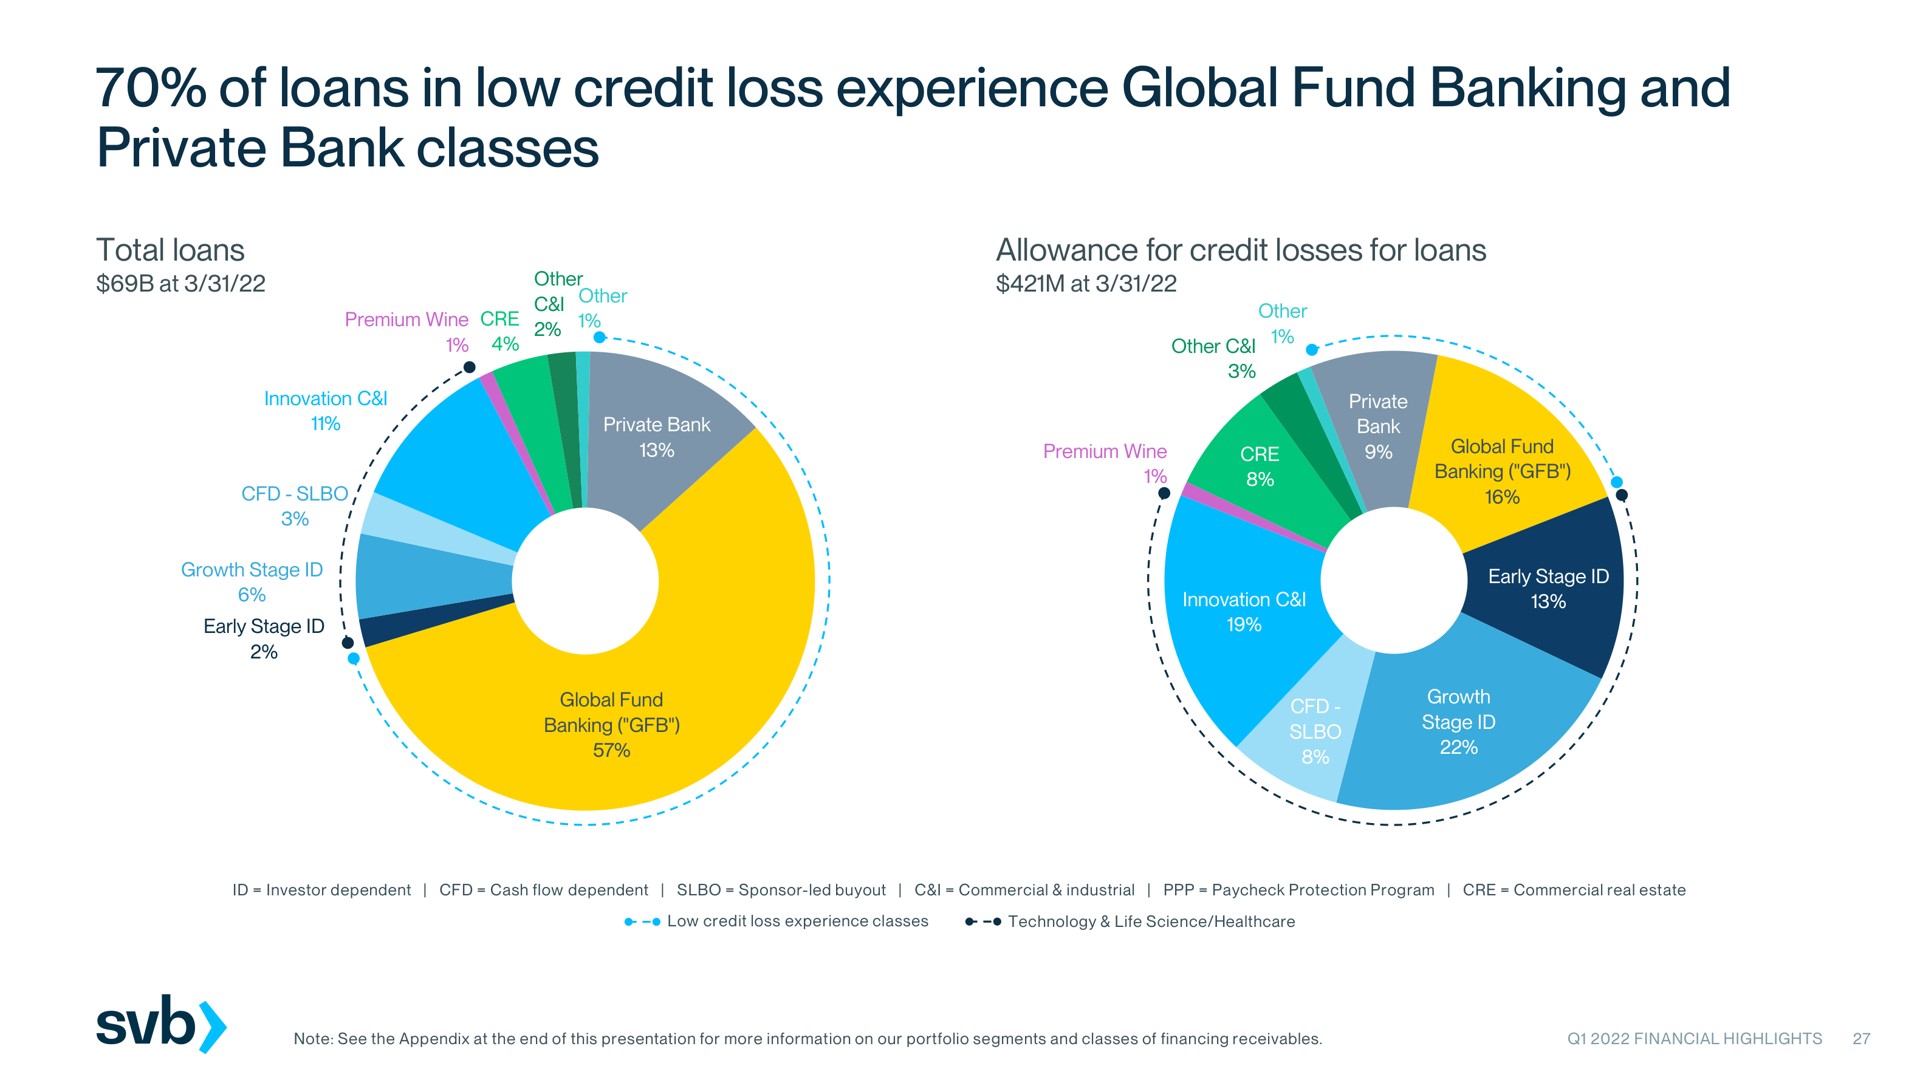 of loans in low credit loss experience global fund banking and private bank classes | Silicon Valley Bank